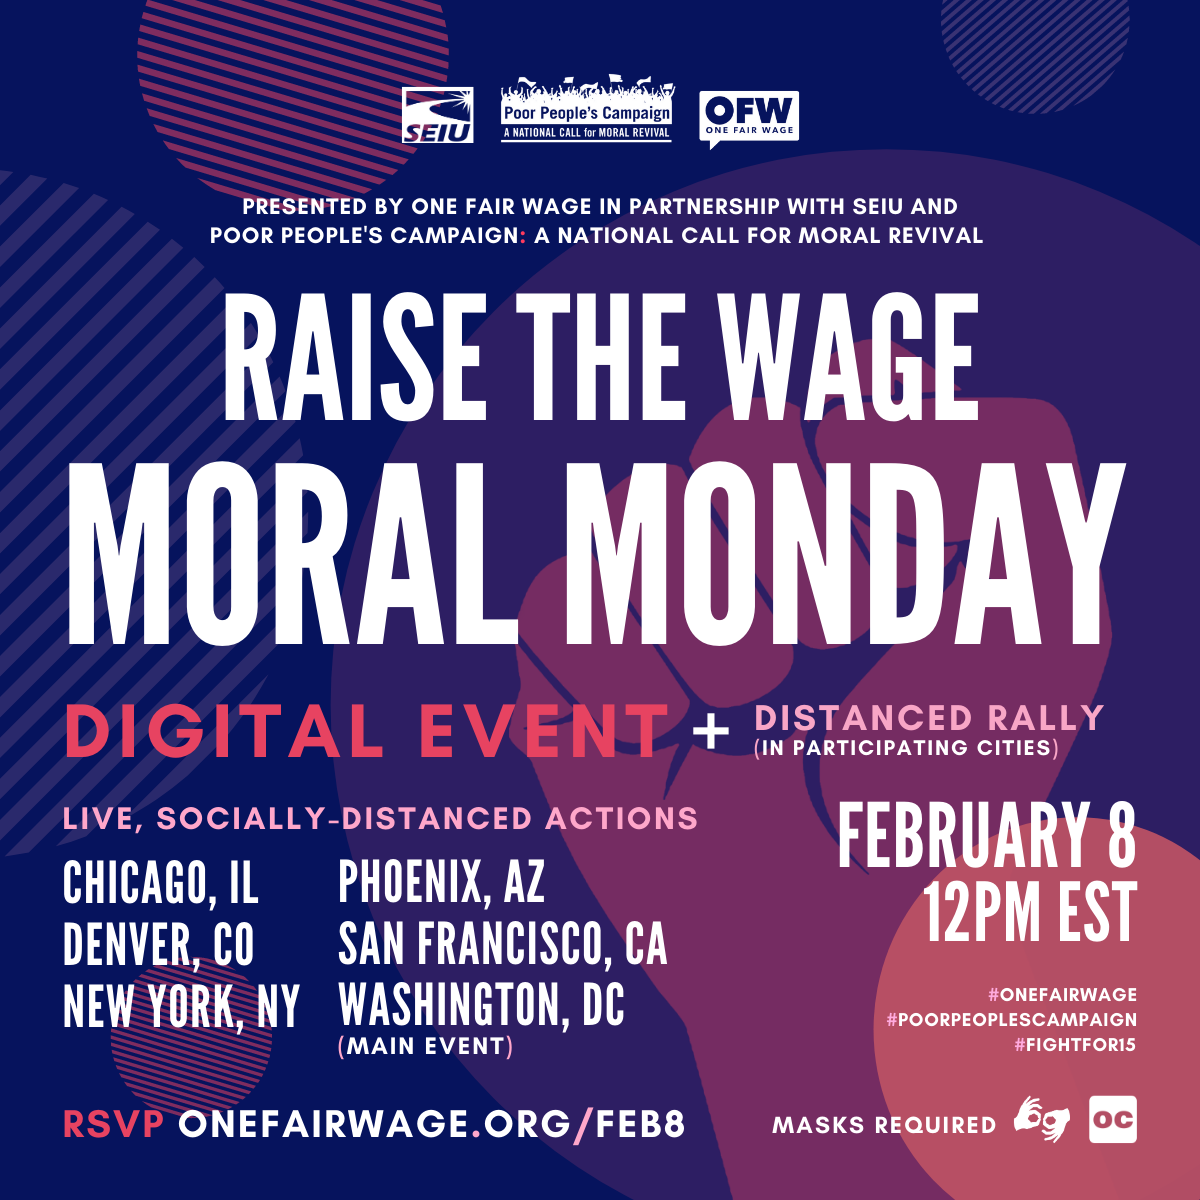 Tipped, lowwage workers join national faith & labor leaders in Moral